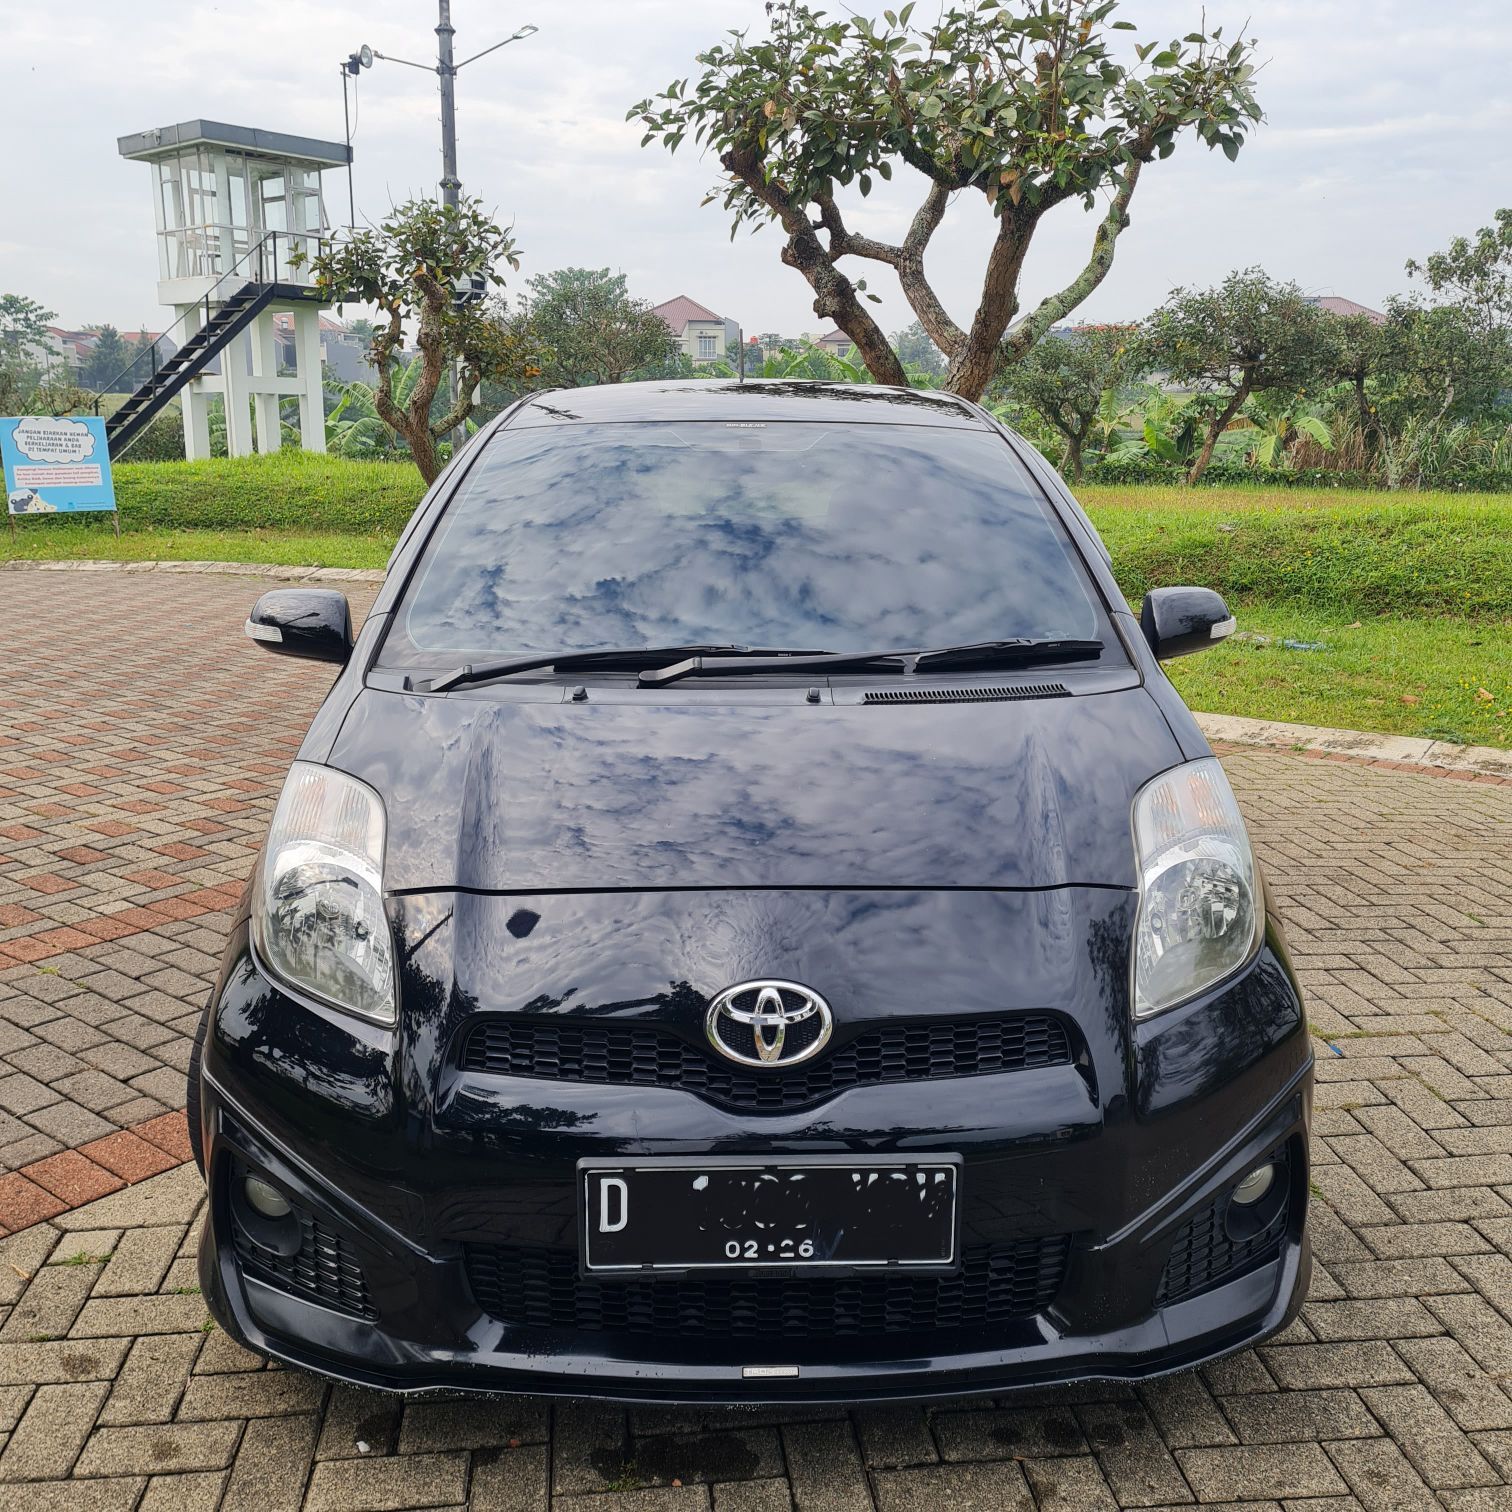 Used 2012 Toyota Yaris S TRD Sportivo 1.5L AT S TRD Sportivo 1.5L AT for sale